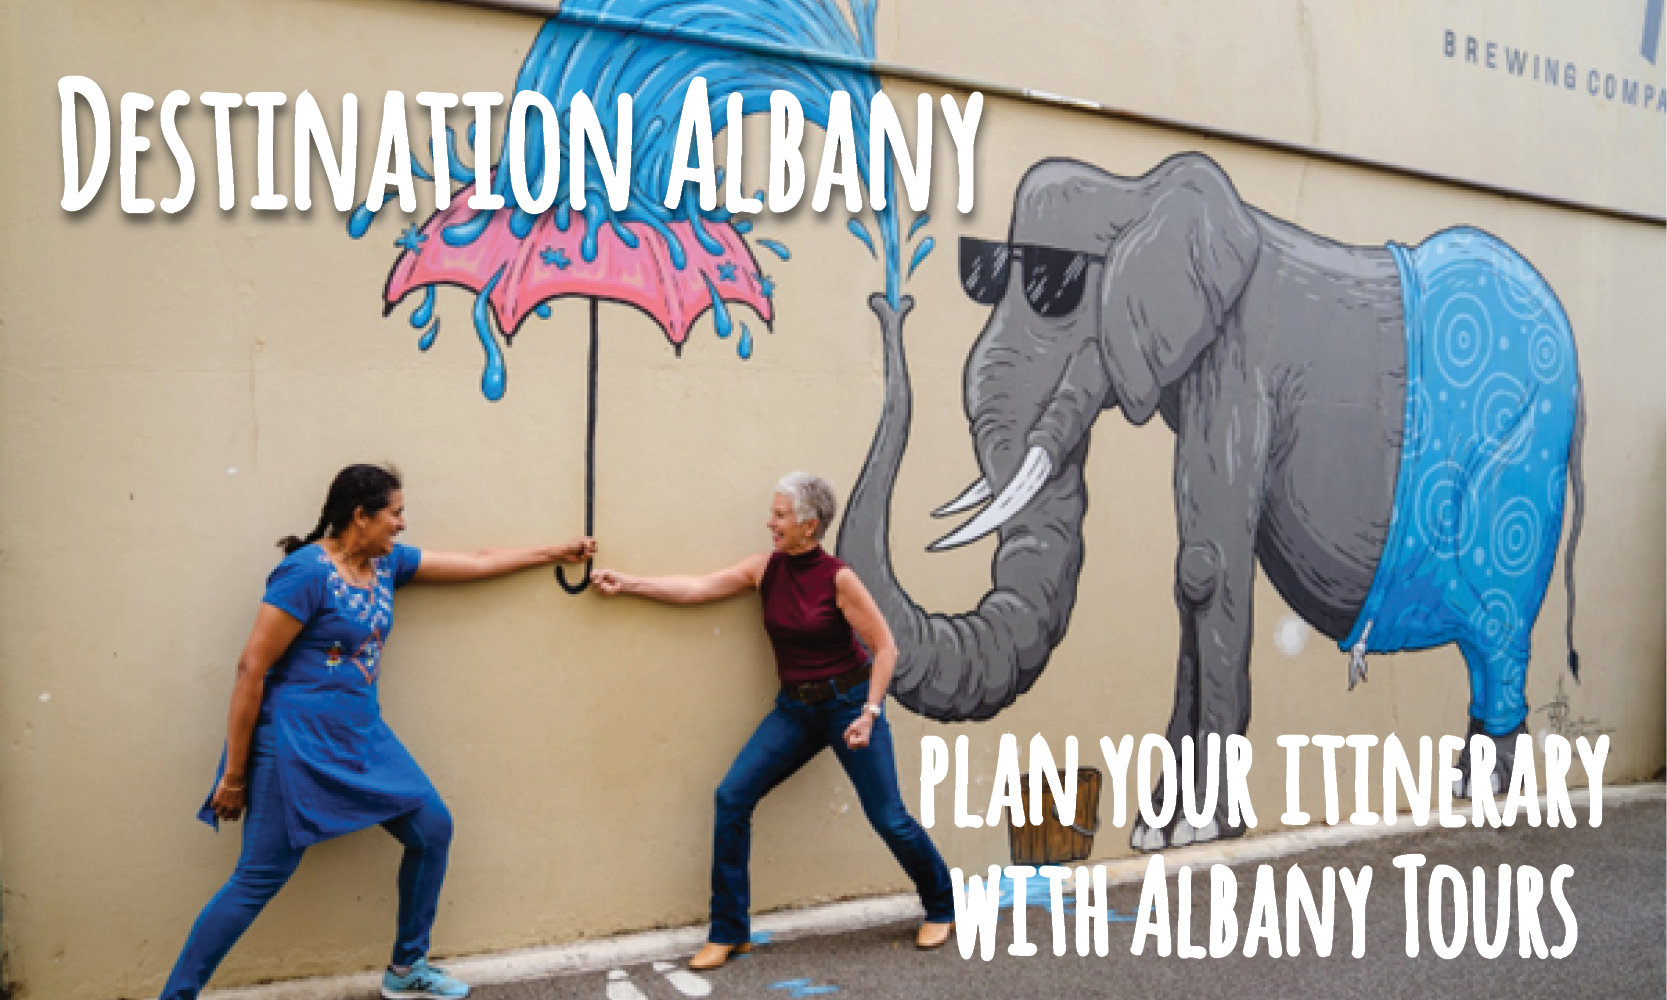 Destination Albany – plan your itinerary with Albany Tours